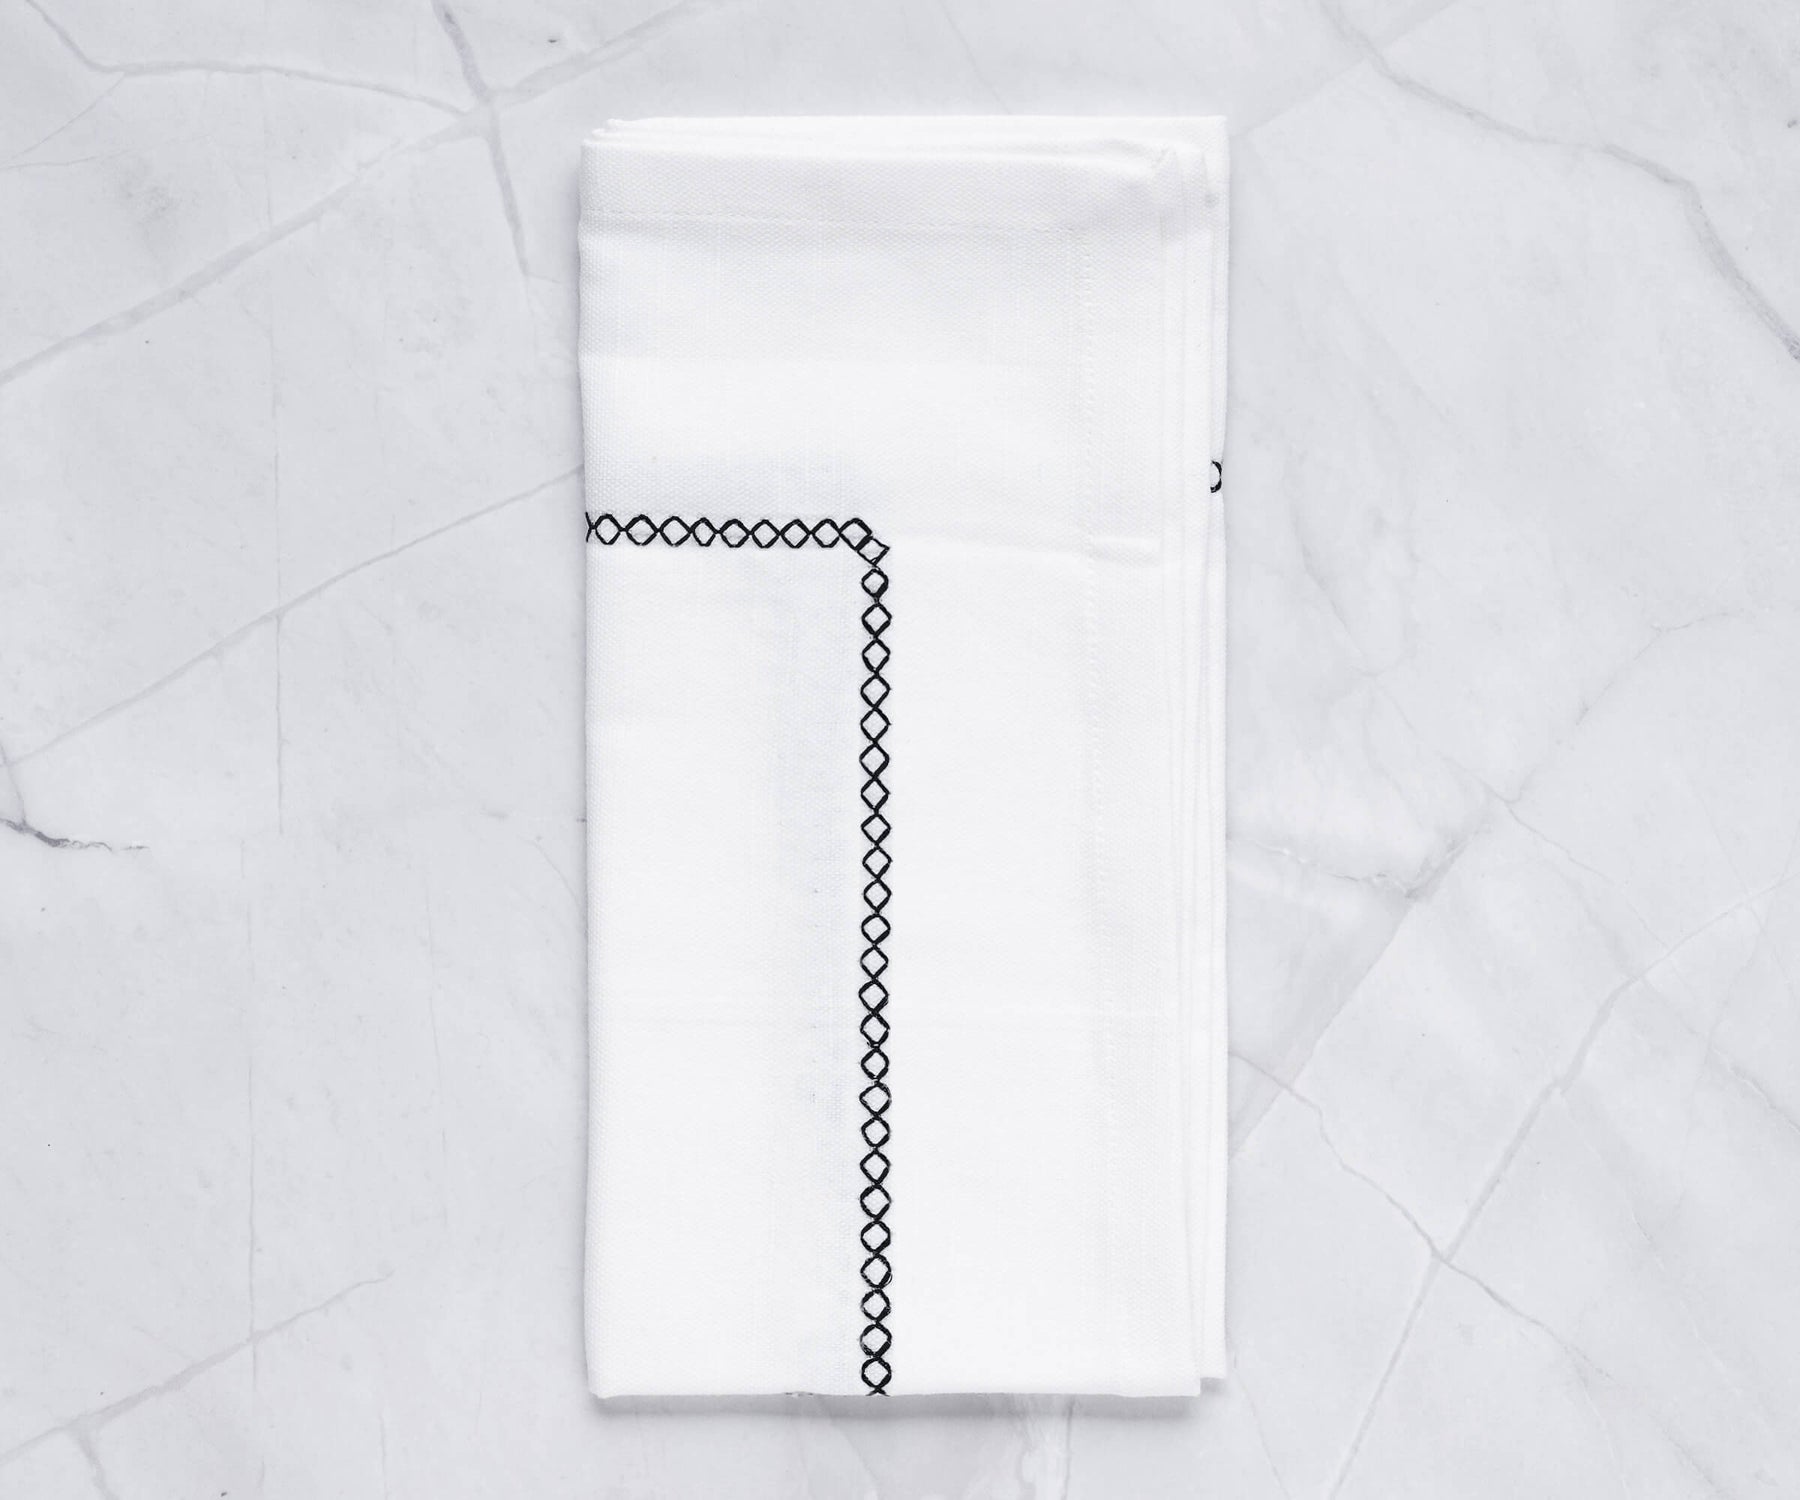 You can explore folding dinner napkins, and different ways to fold them in personalized options.